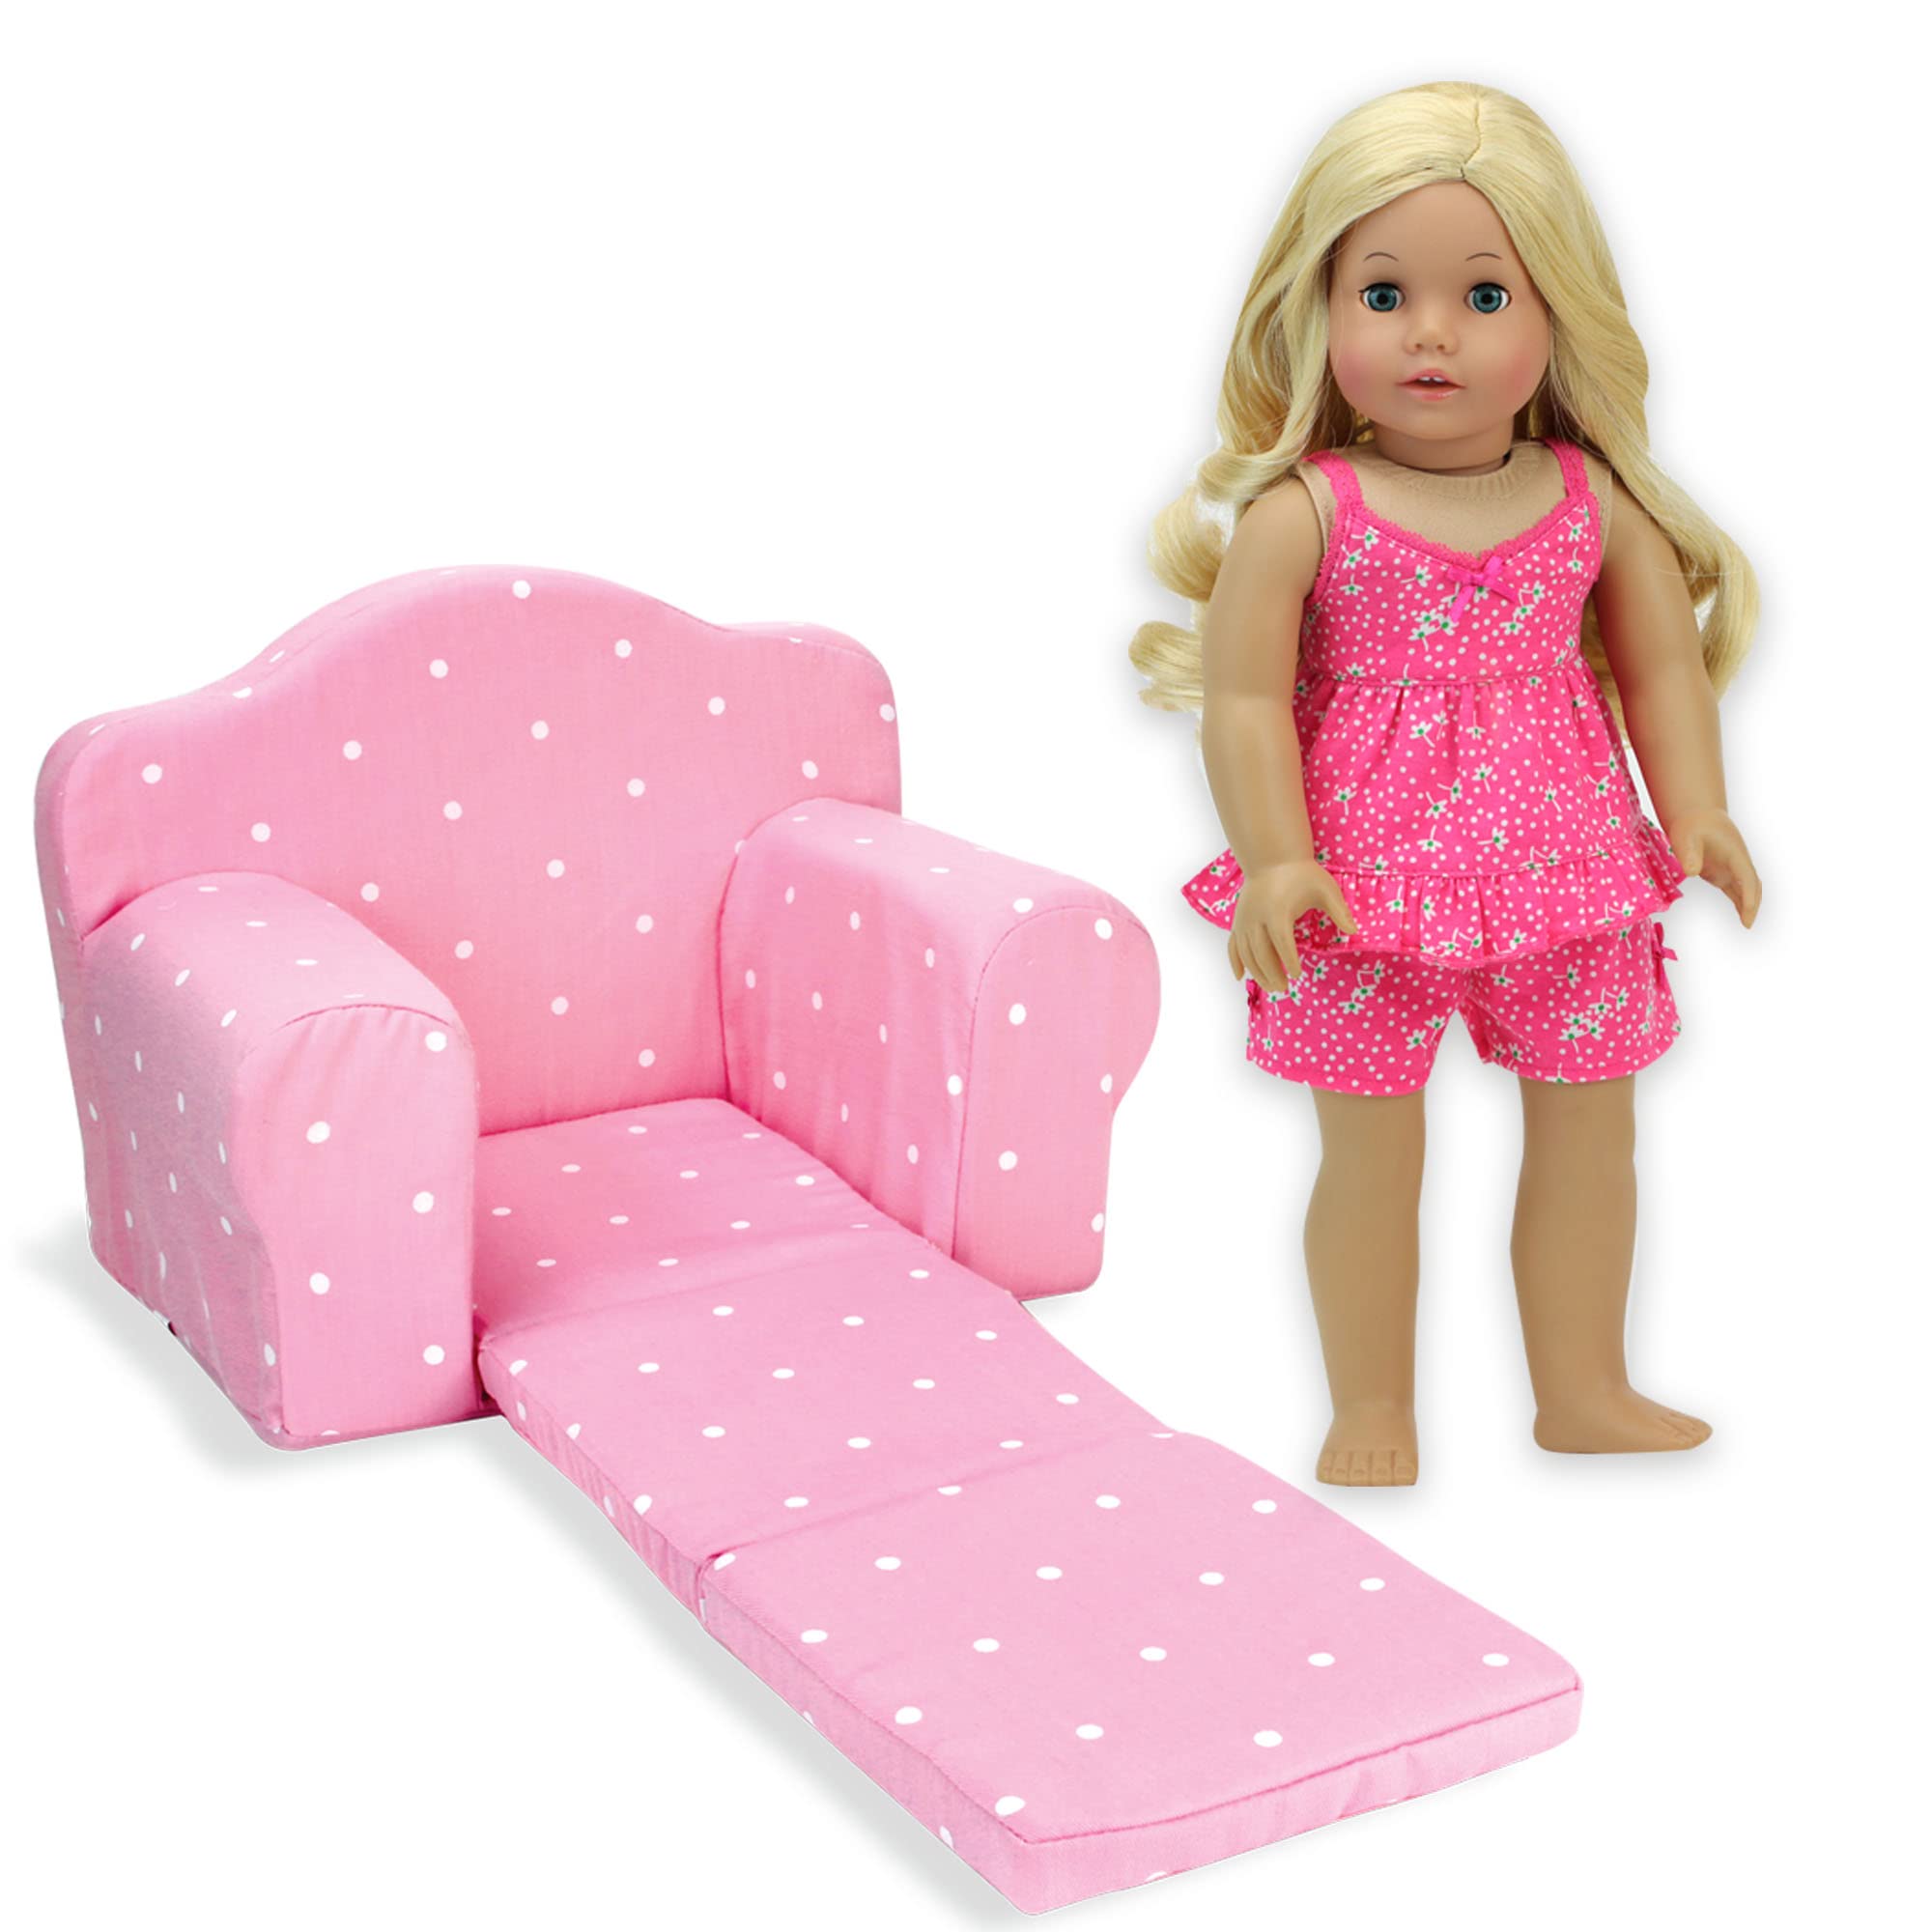 Sophia's 2-in-1 Plush Polka Dot Pull-Out Sleeper Chair Converts to Single Bed for 18'' Dolls, Light Pink